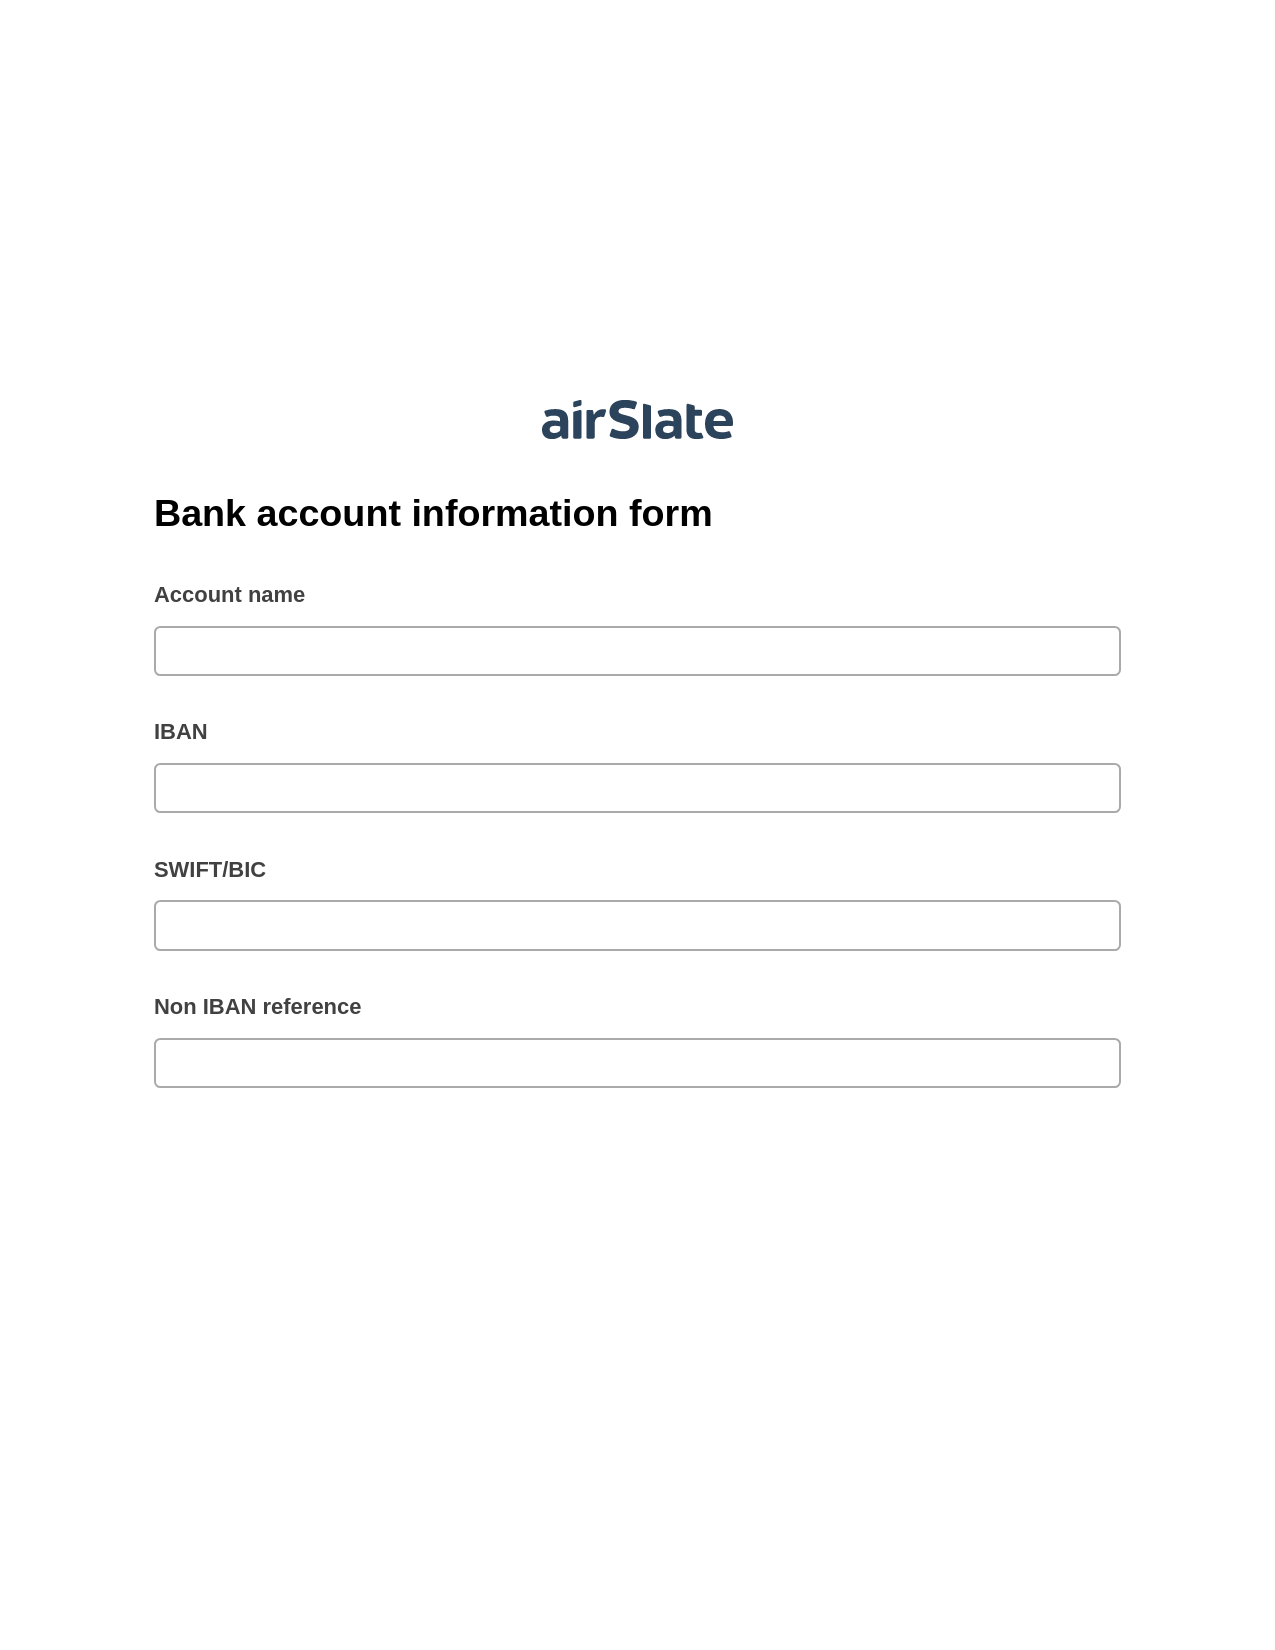 Multirole Bank account information form System Bot - Slack Two-Way Binding Bot, Mailchimp add recipient to audience Bot, Google Drive Bot